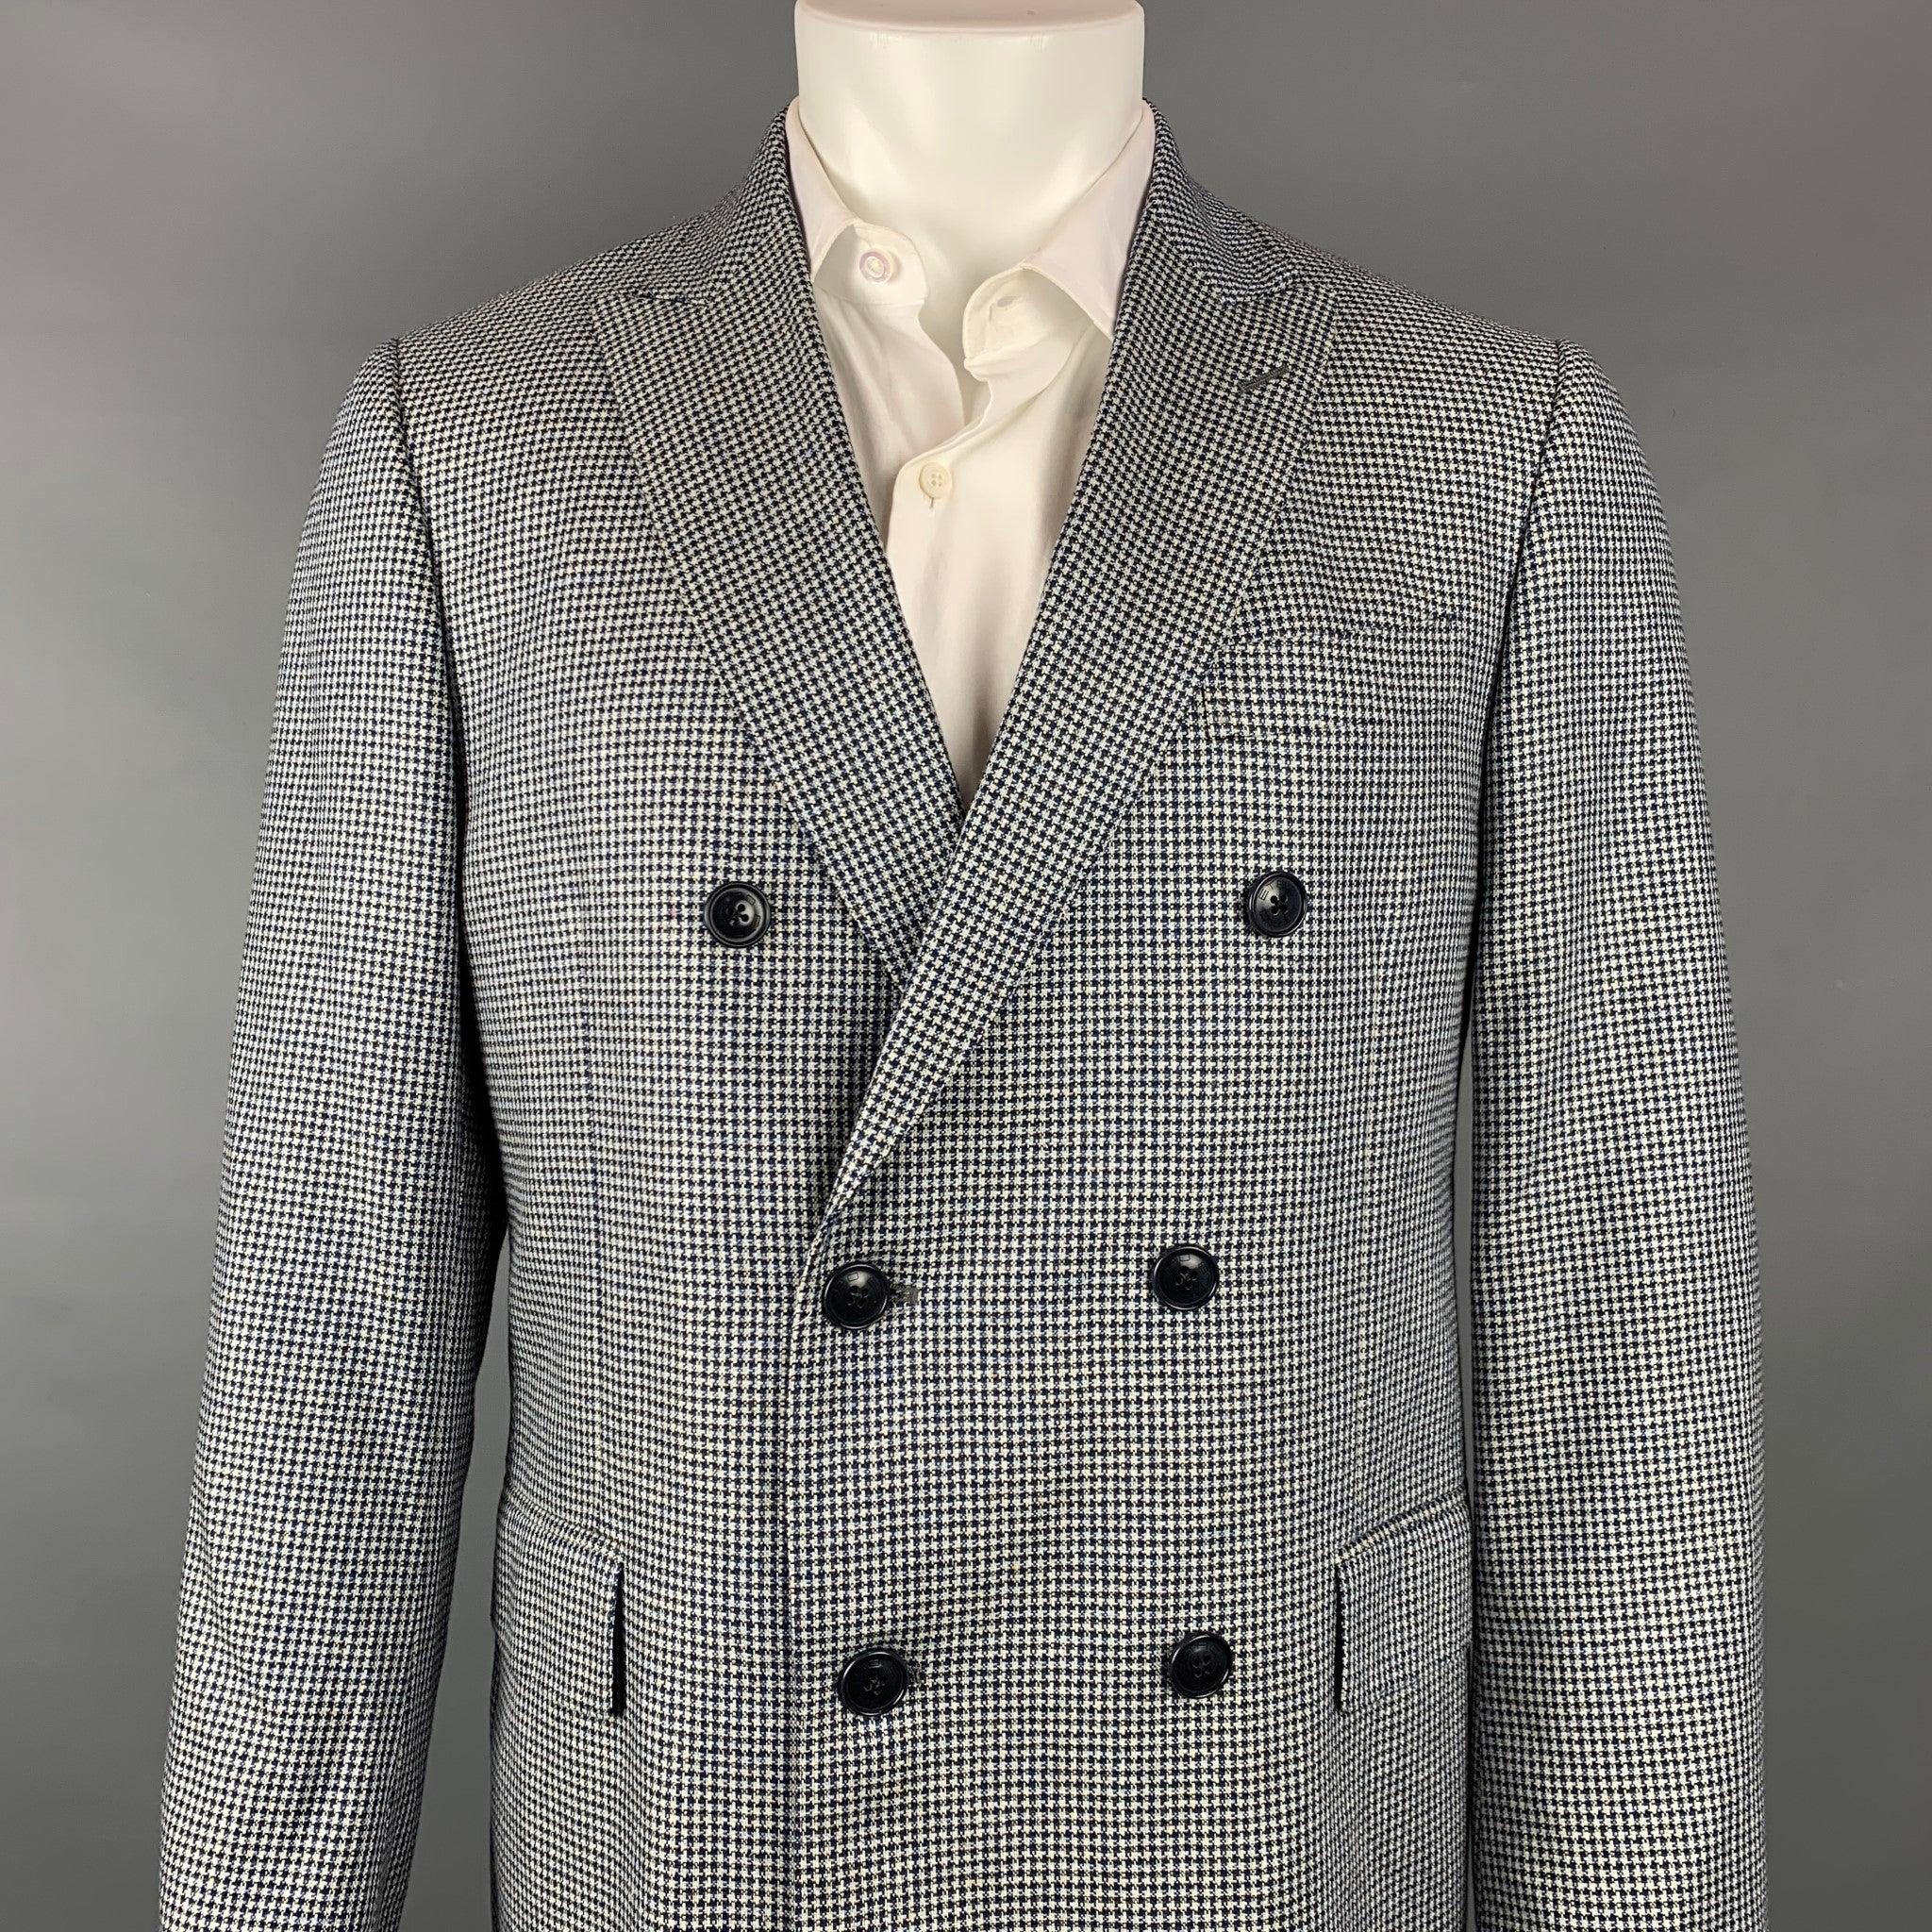 ETRO sport coat comes in a navy & white houndstooth silk with a full liner featuring a peak lapel, flap pockets, and a double breasted closure. Made in Italy.Very Good
 Pre-Owned Condition. 
 

 Marked:  IT 50 
 

 Measurements: 
  
 Shoulder: 17.5